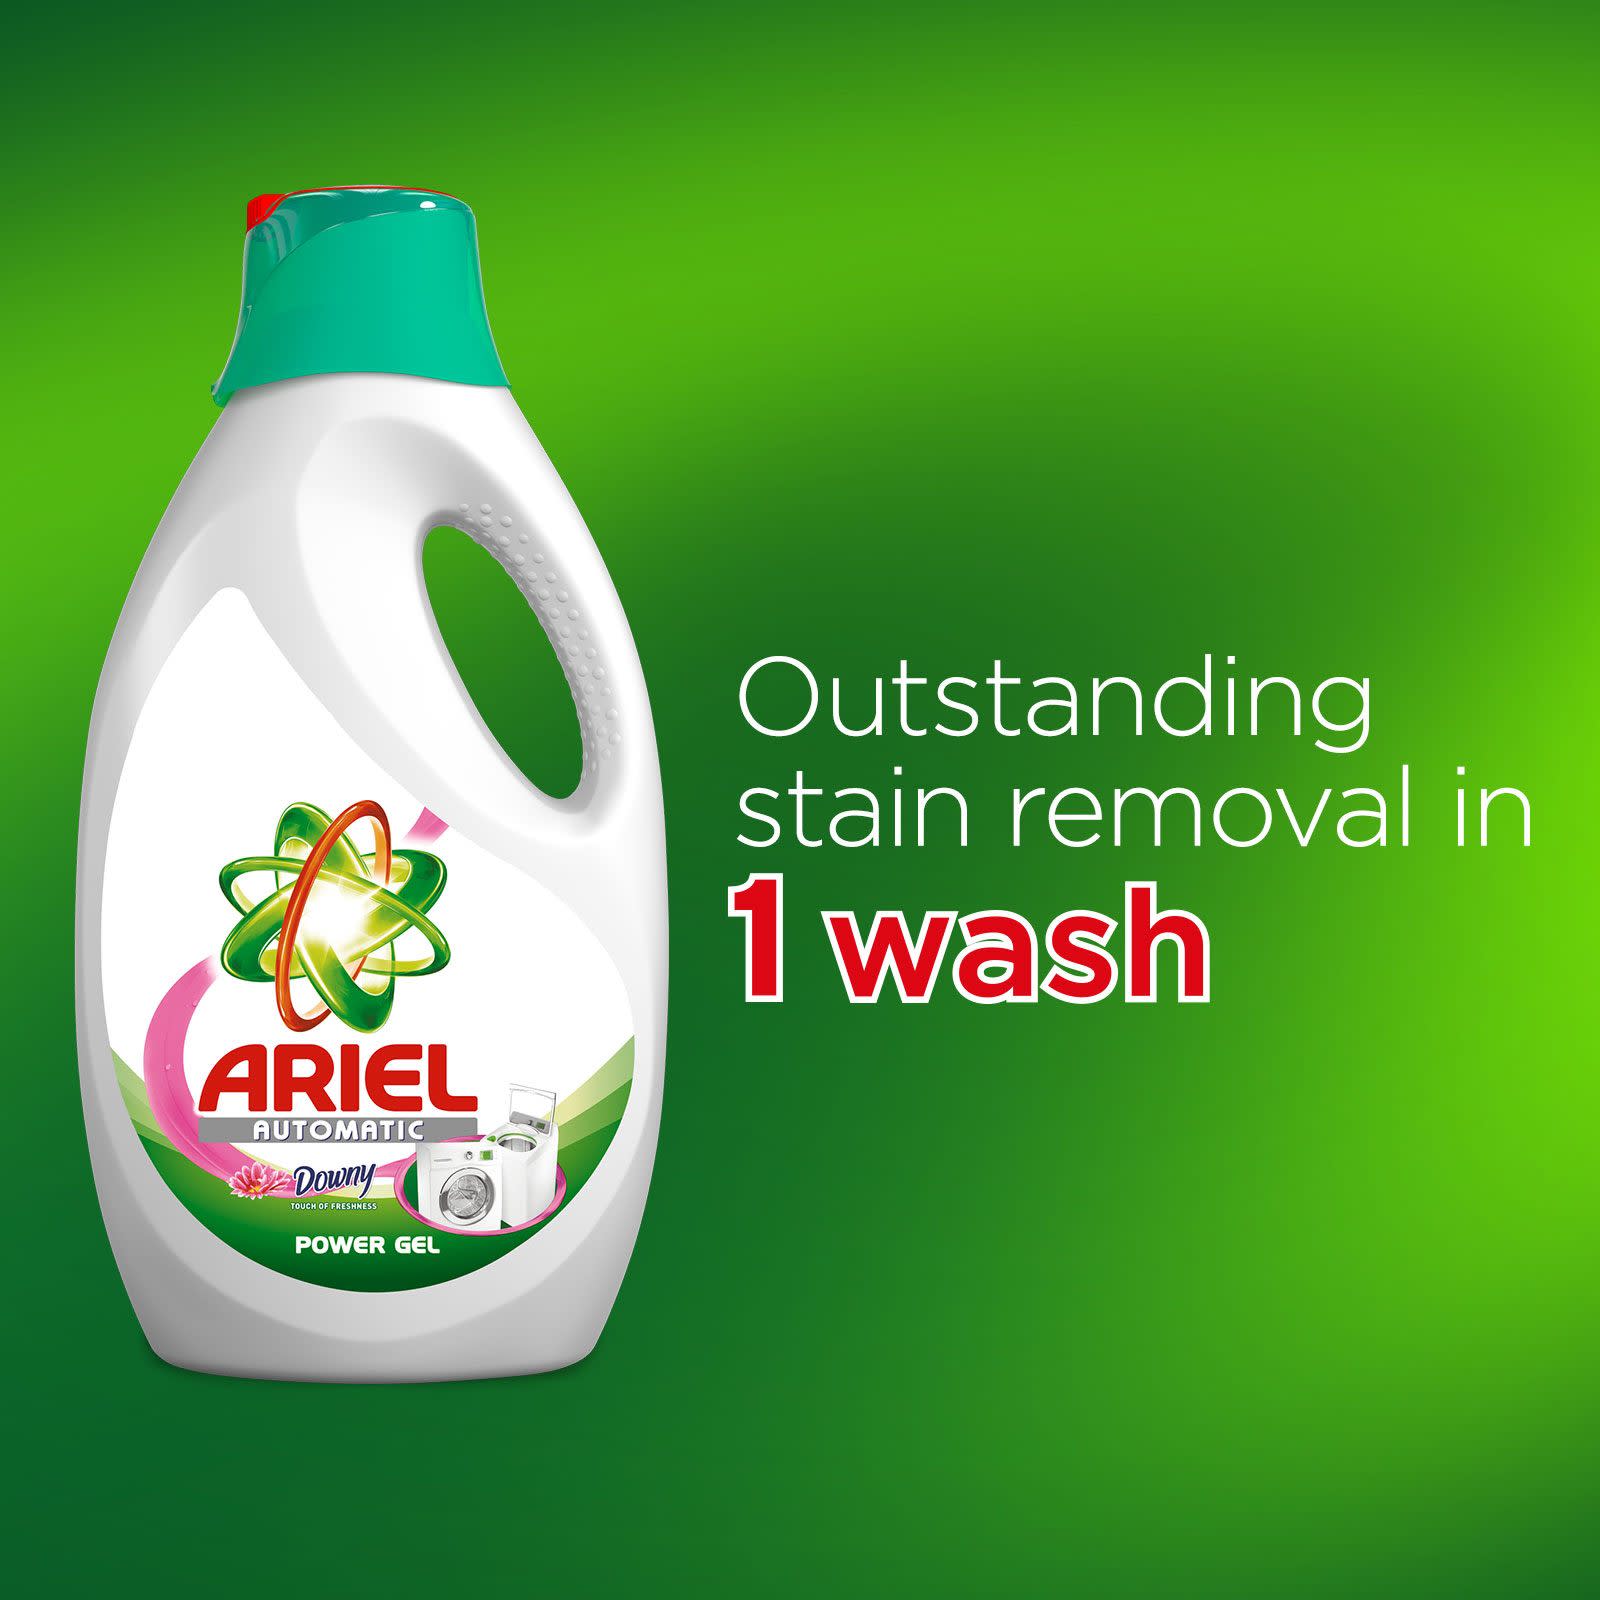 Ariel Automatic Washing Power Gel Laundry Detergent Touch of Freshness Downy